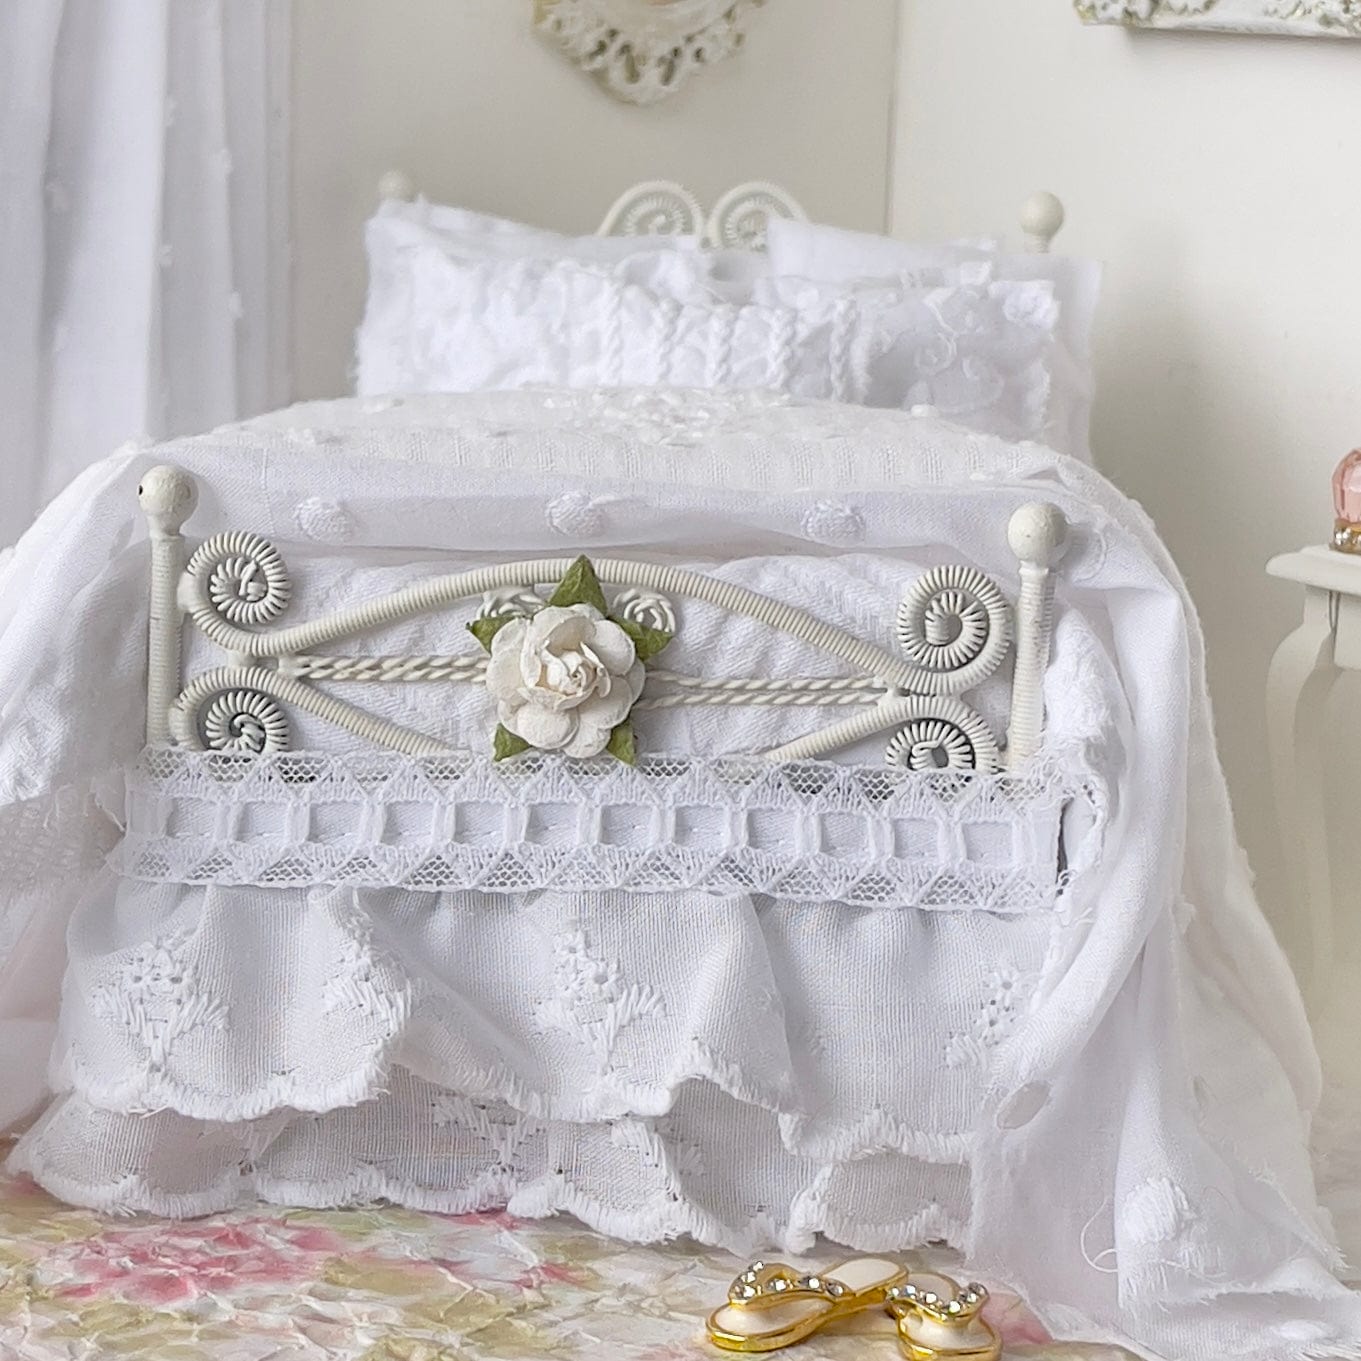 Chantallena Doll House (Copy) Dressed Bed  | Sold White Cotton with Embroidered and Eyelet Lace Accents